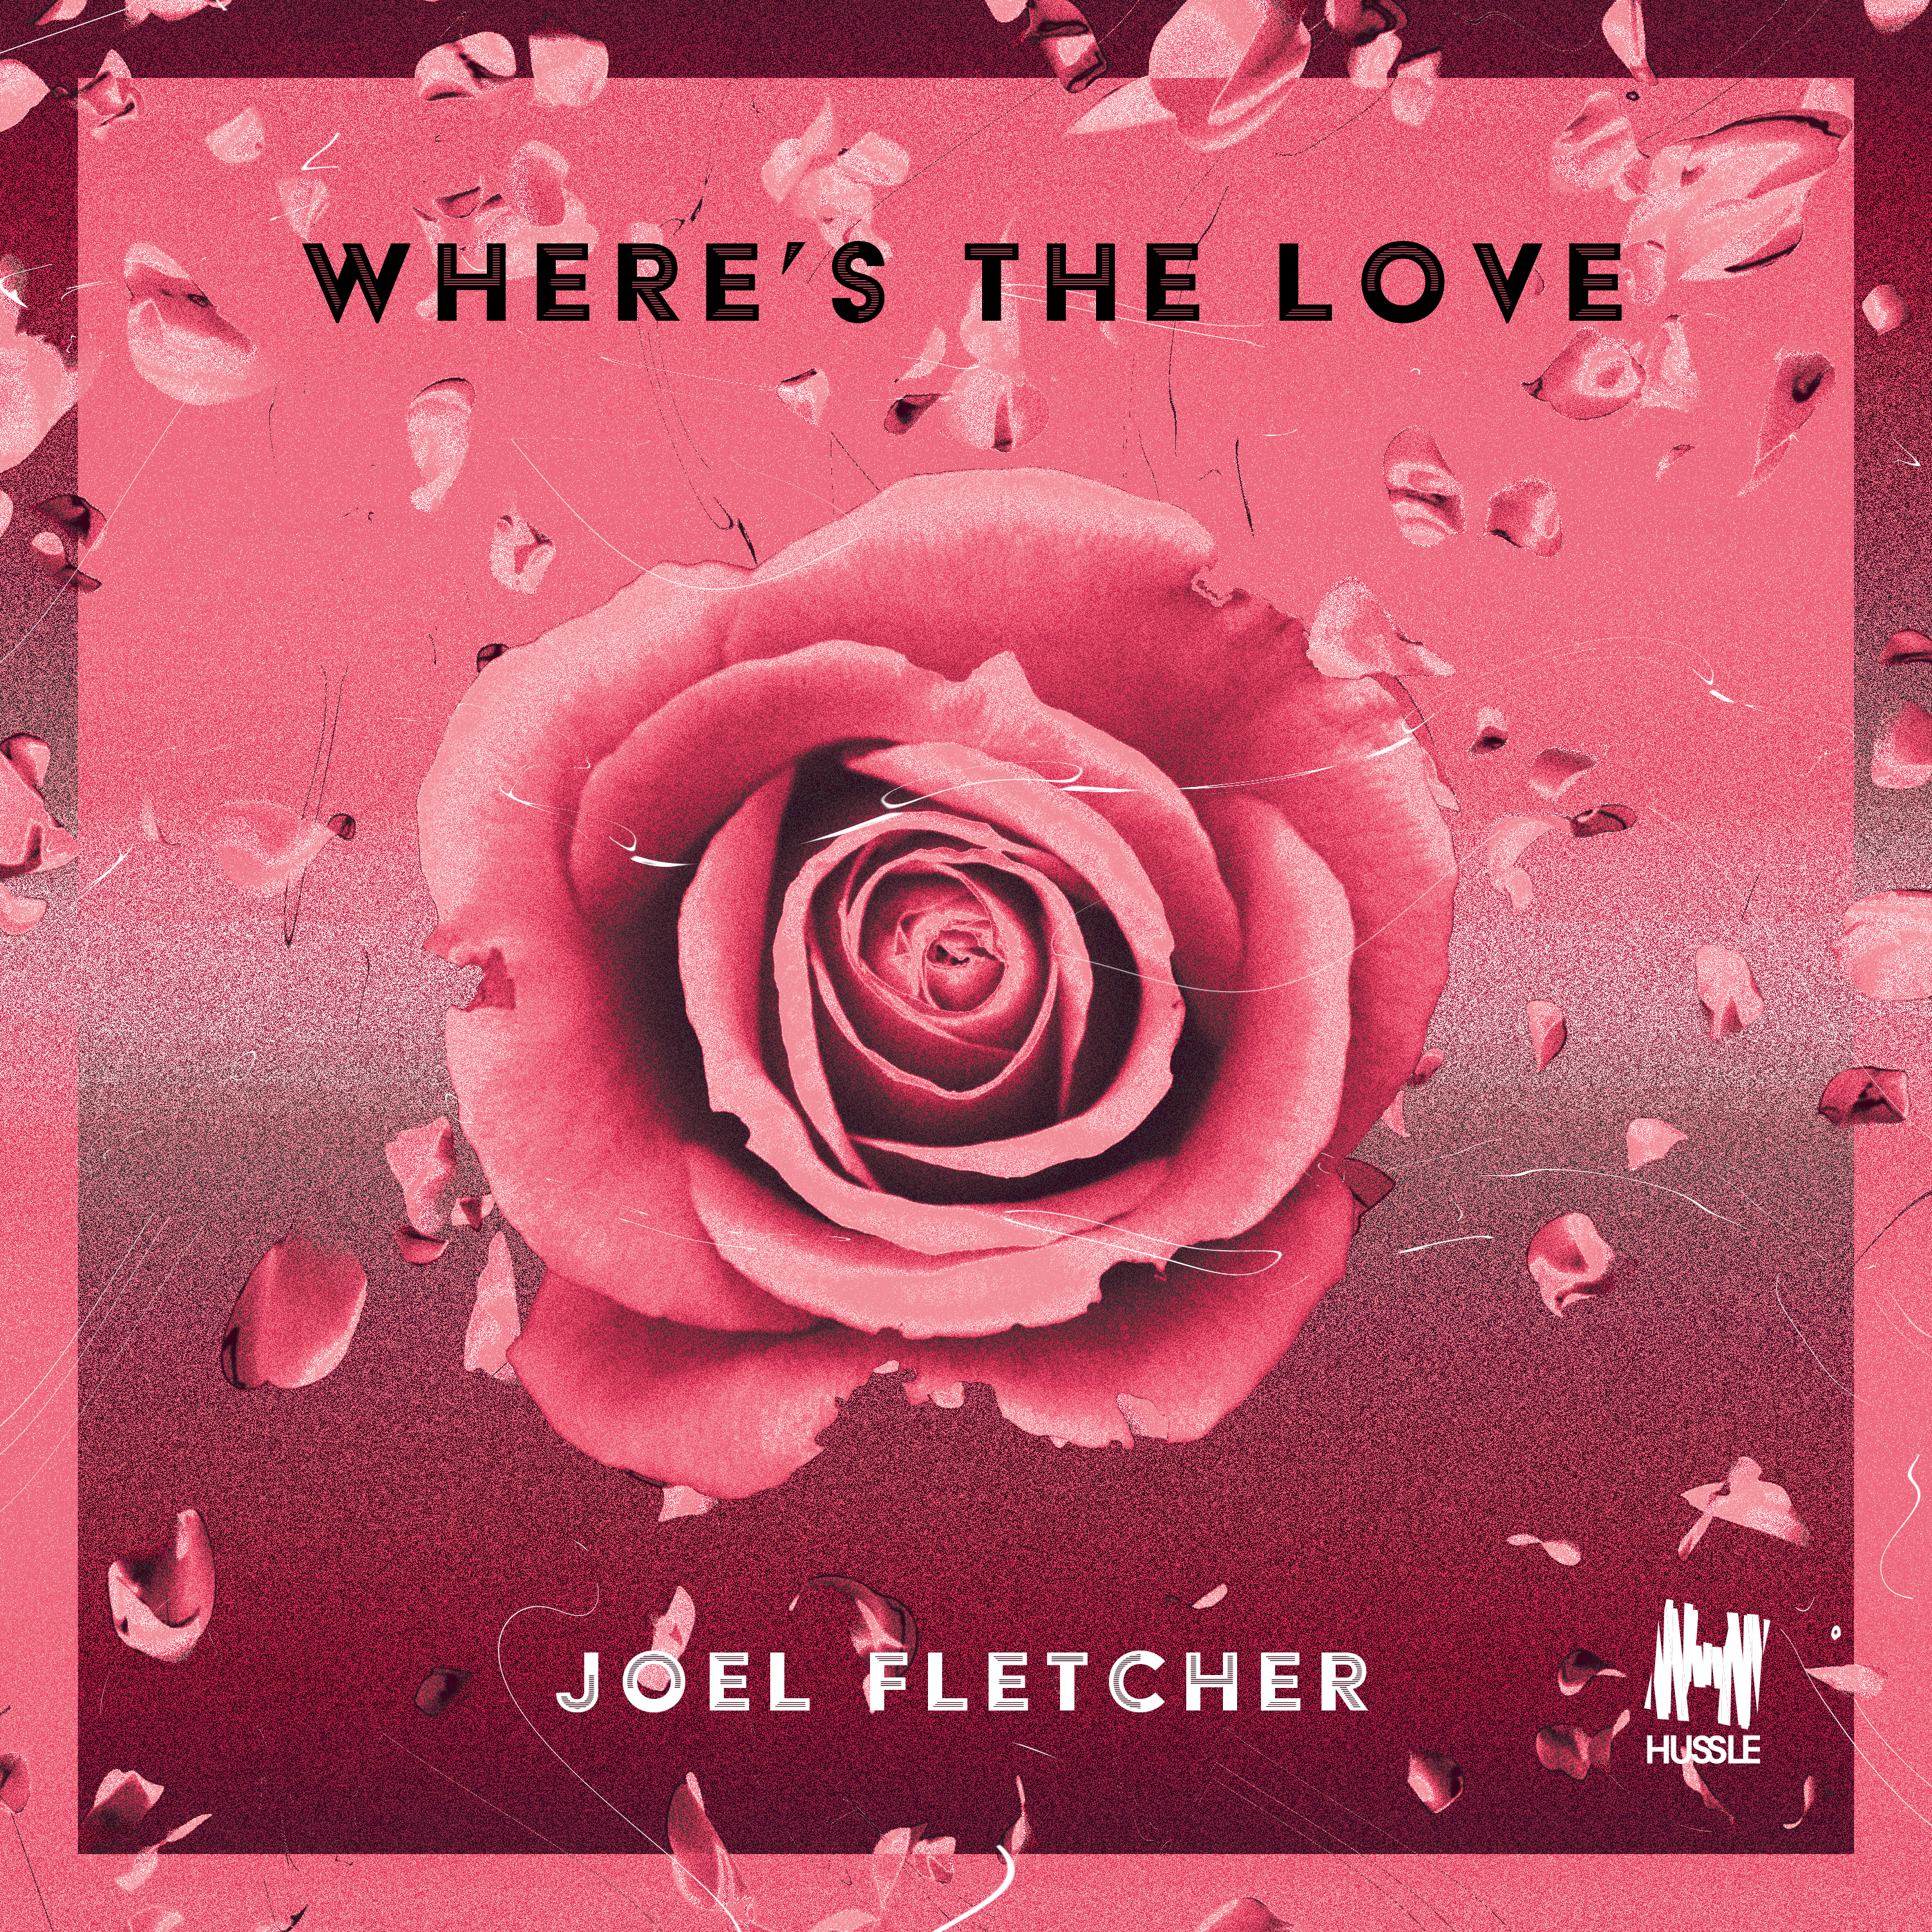 Joel Fletcher Closes February 2018 With “Where’s The Love”